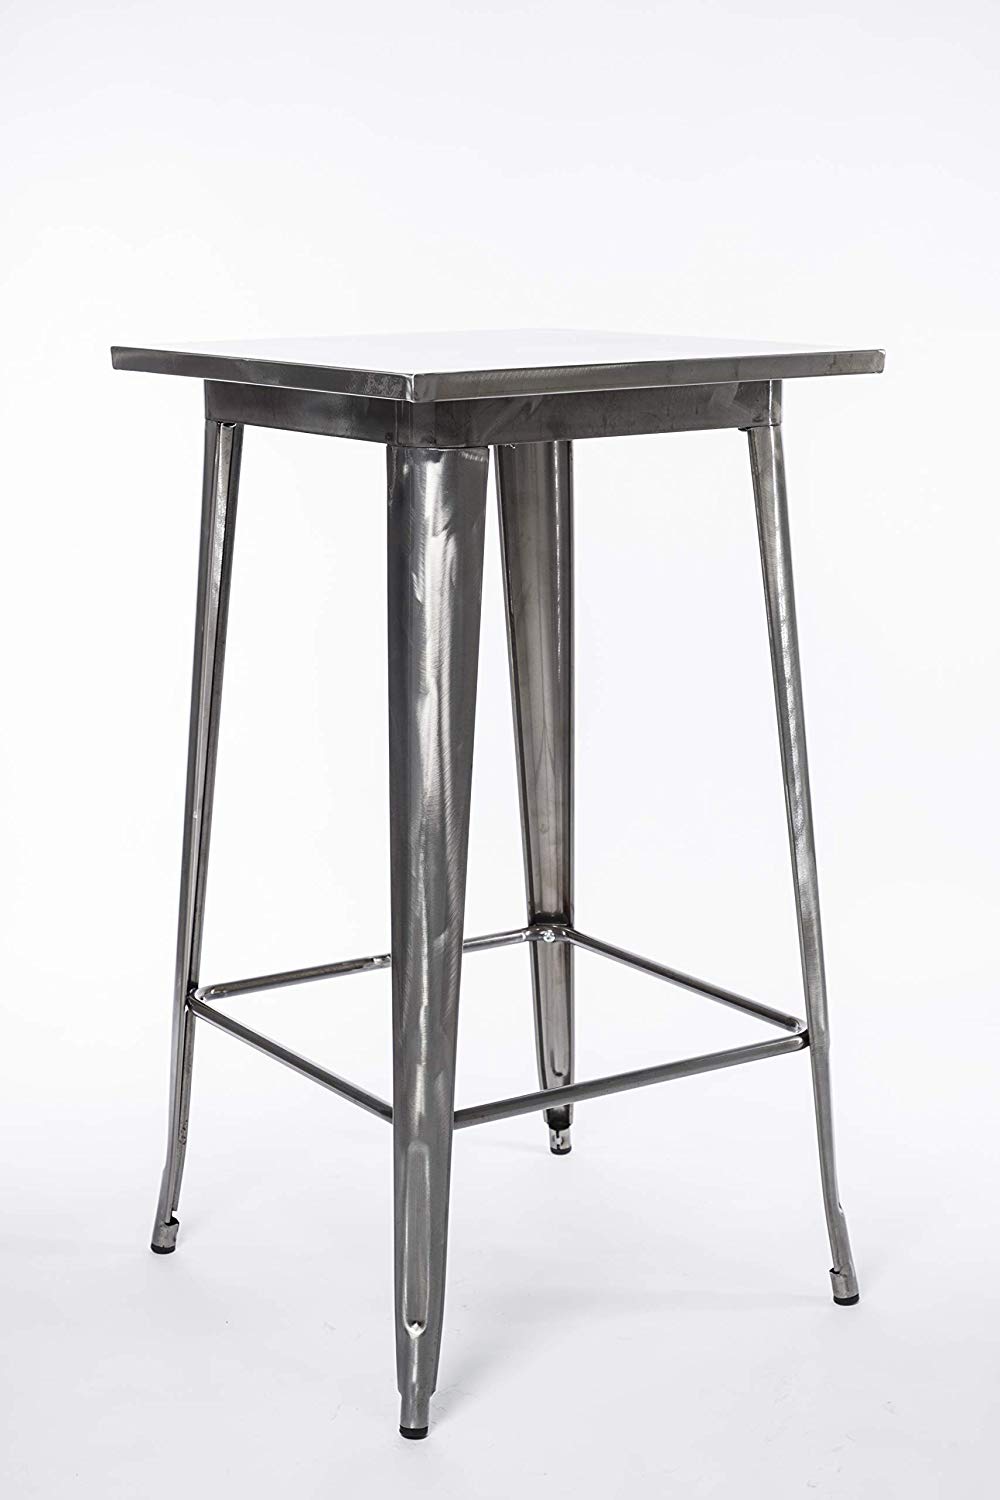 BTExpert Industrial Antique Distressed Rustic Steel Metal Dining Pub Square Table 23.5